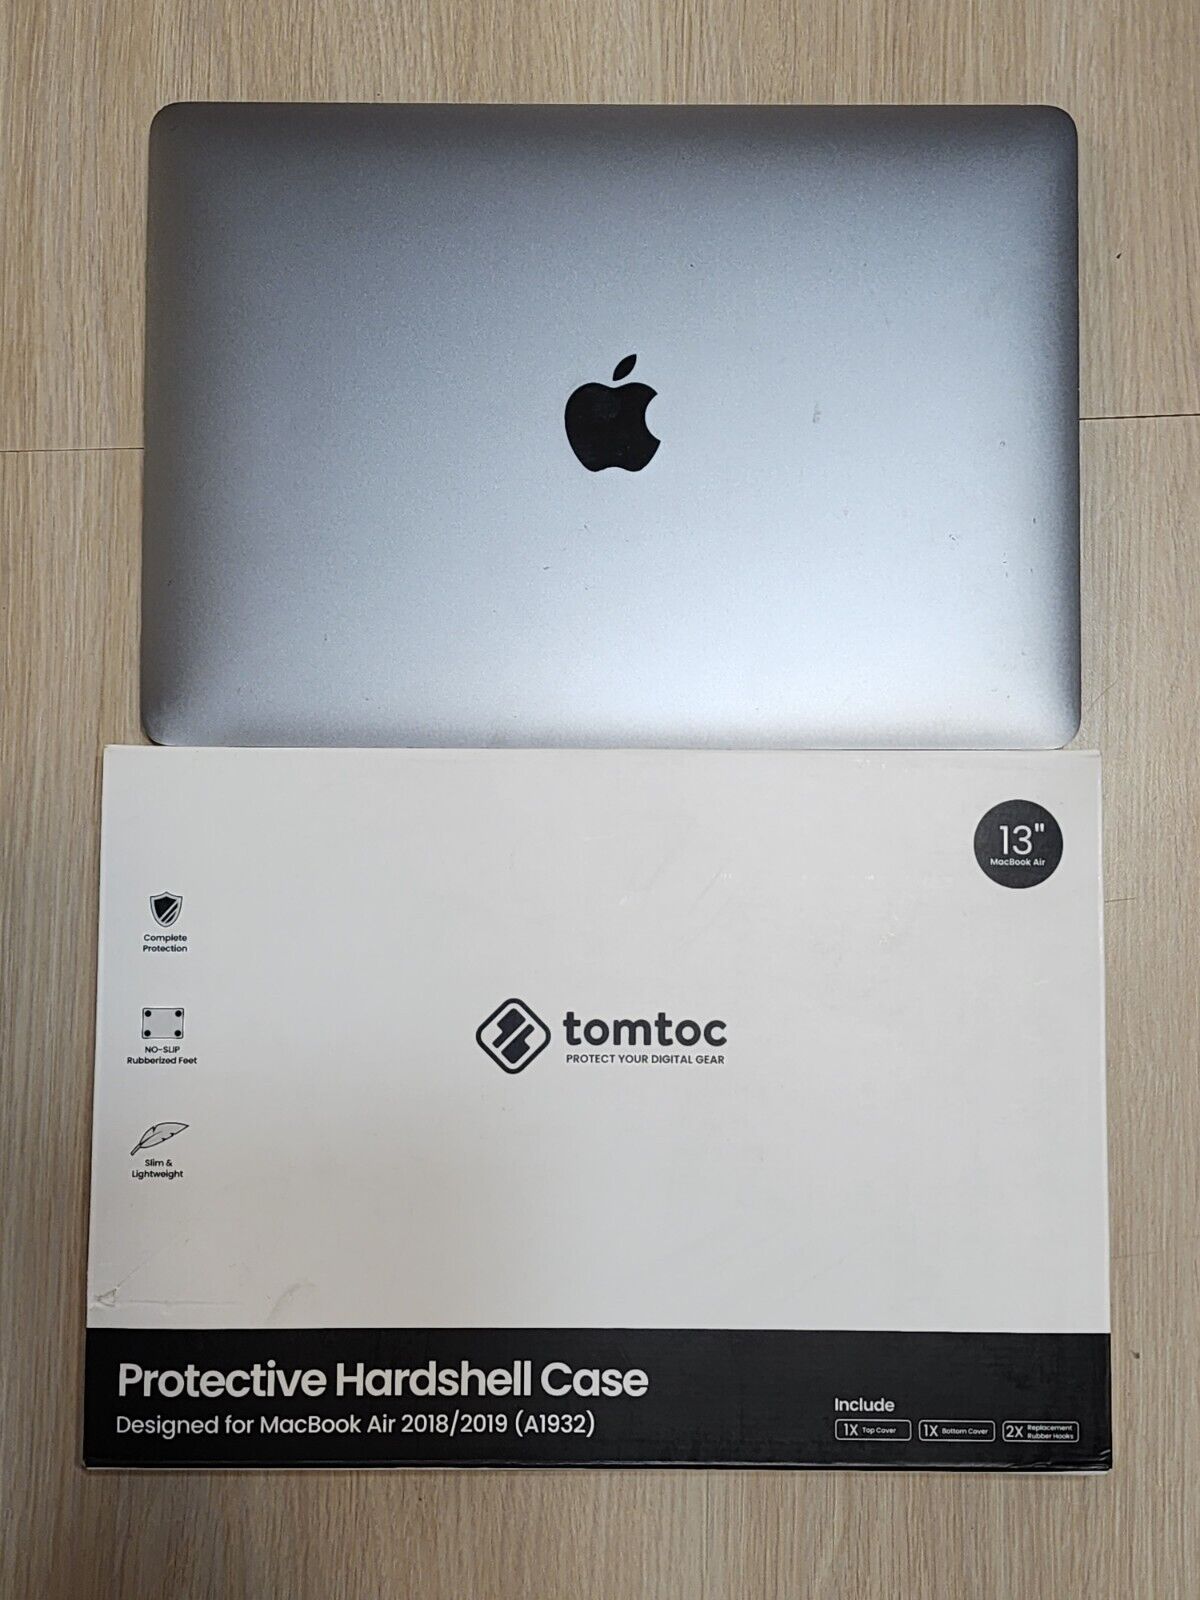 Tomtoc Proective Hardshell Case 13-inch For Macbook Air 2018/2019 (A1932)